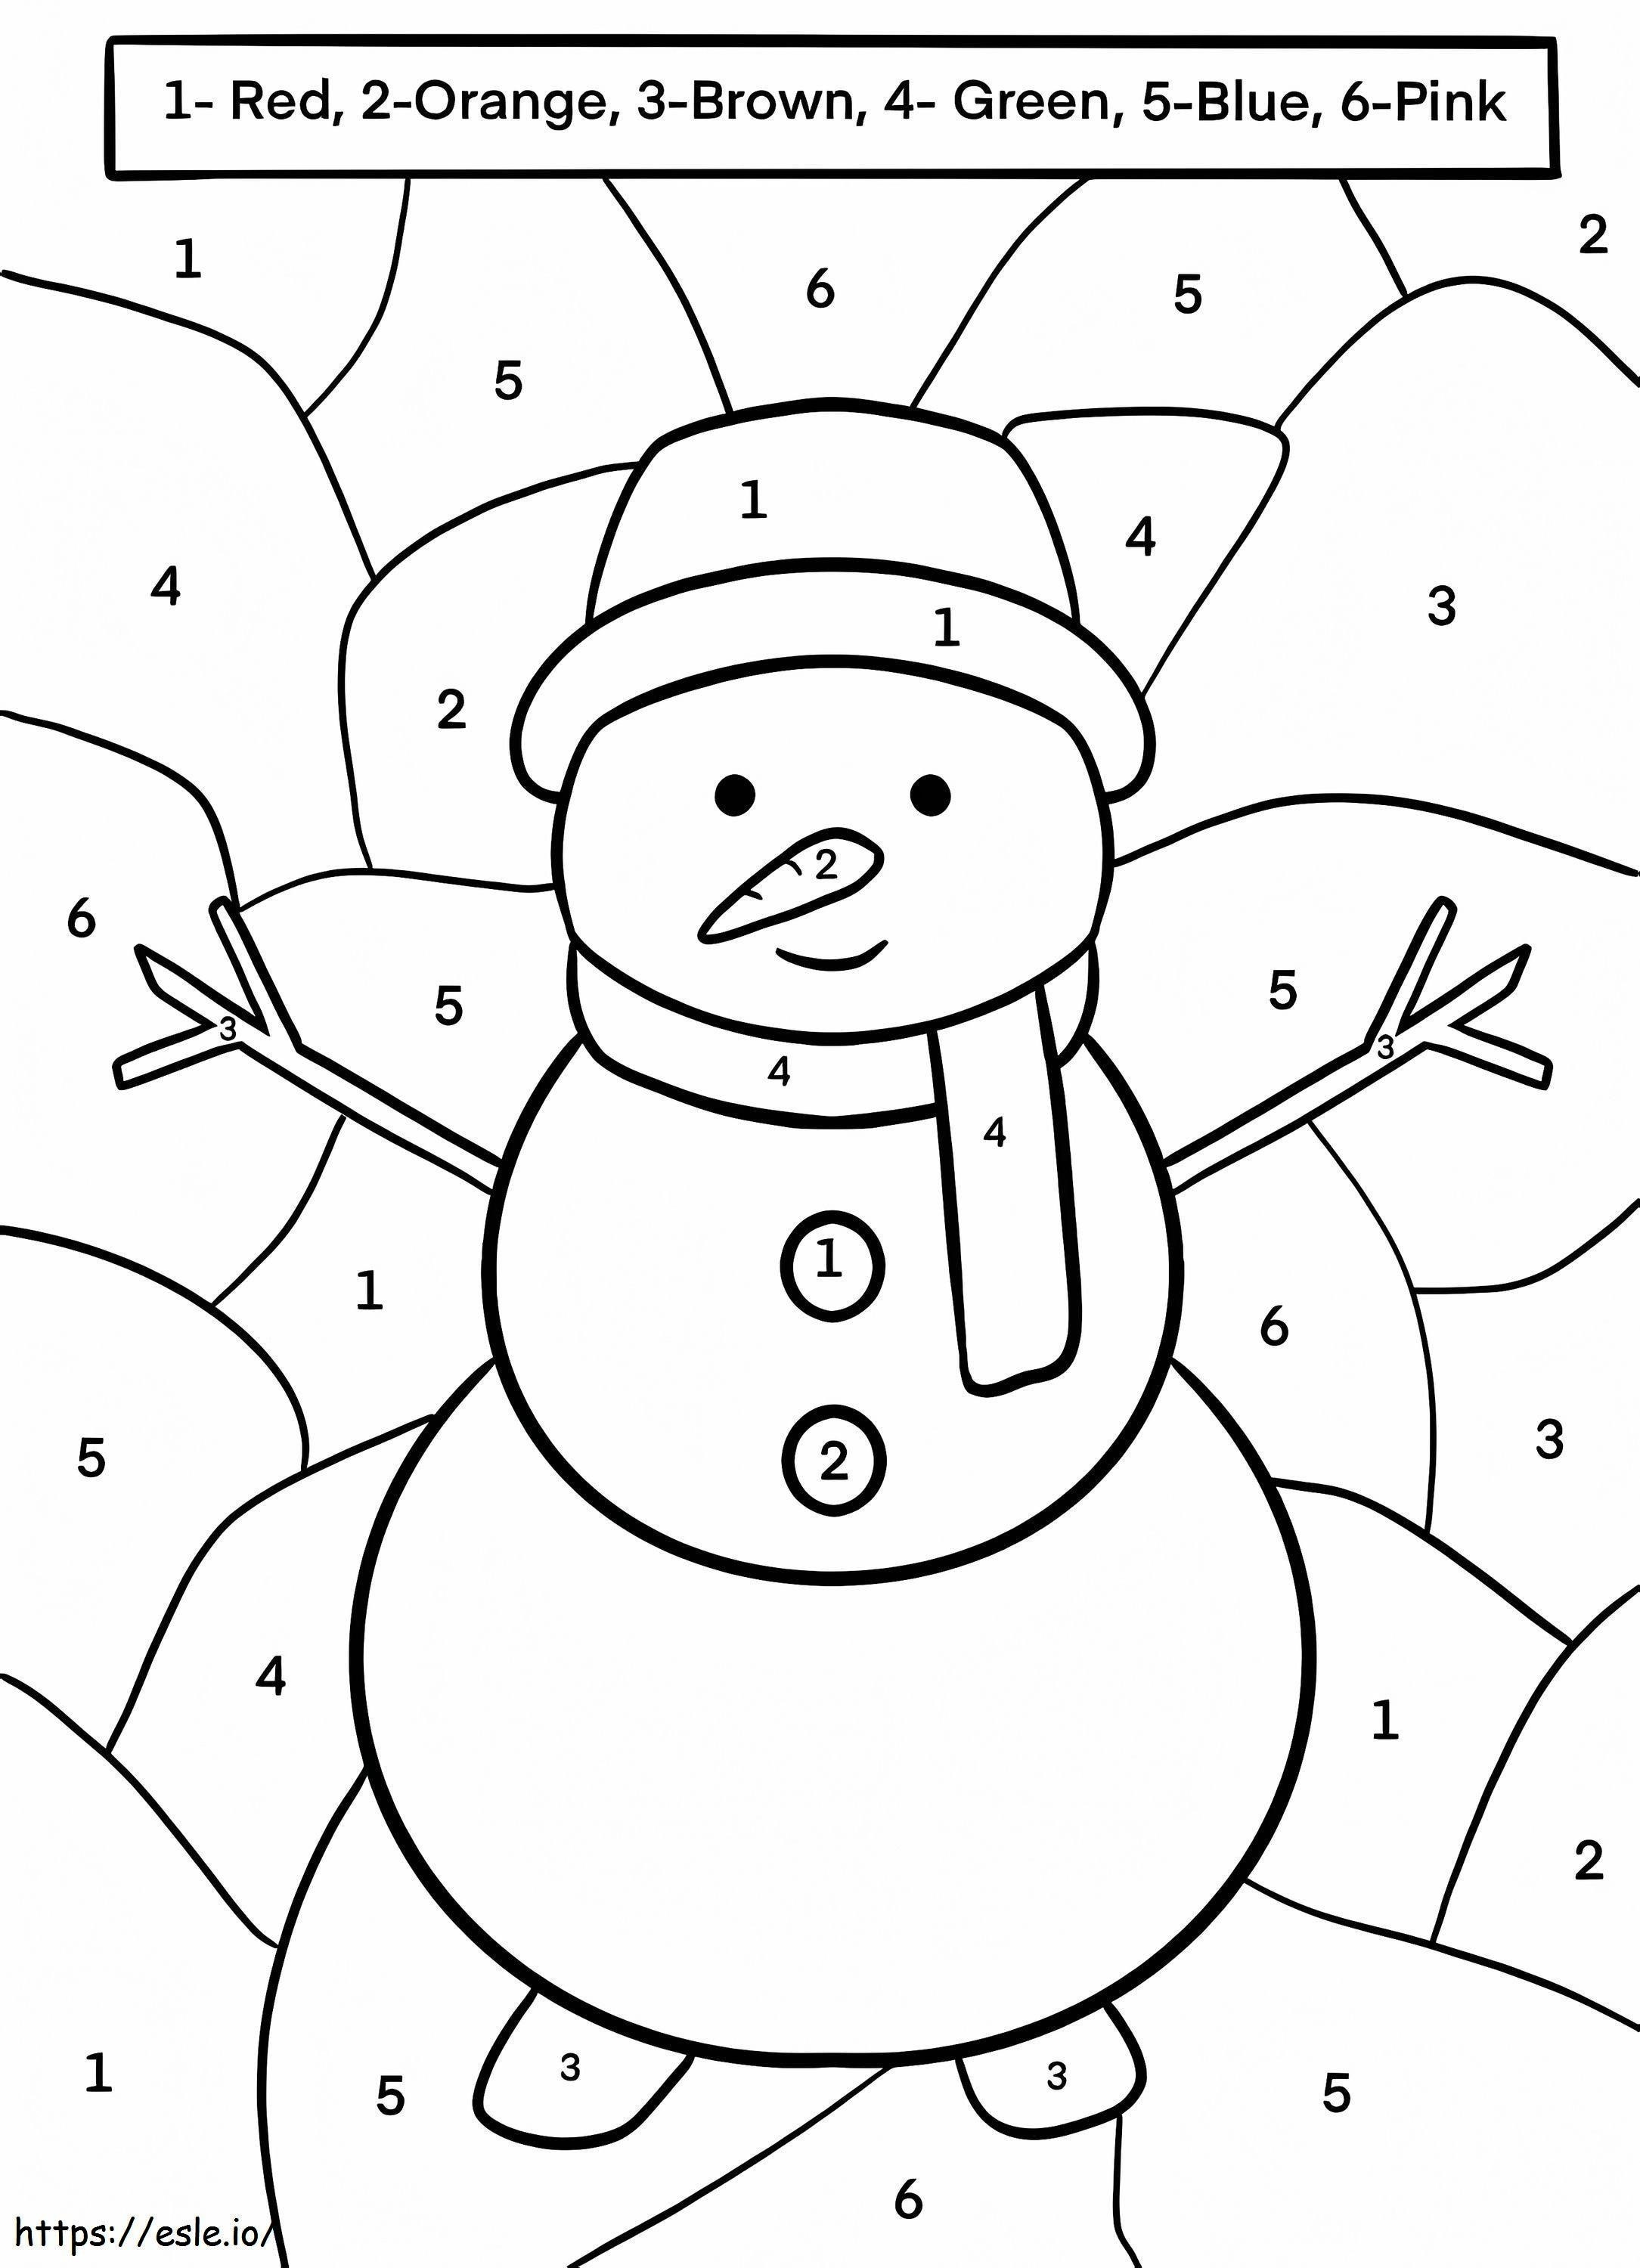 Snowman Color By Number coloring page